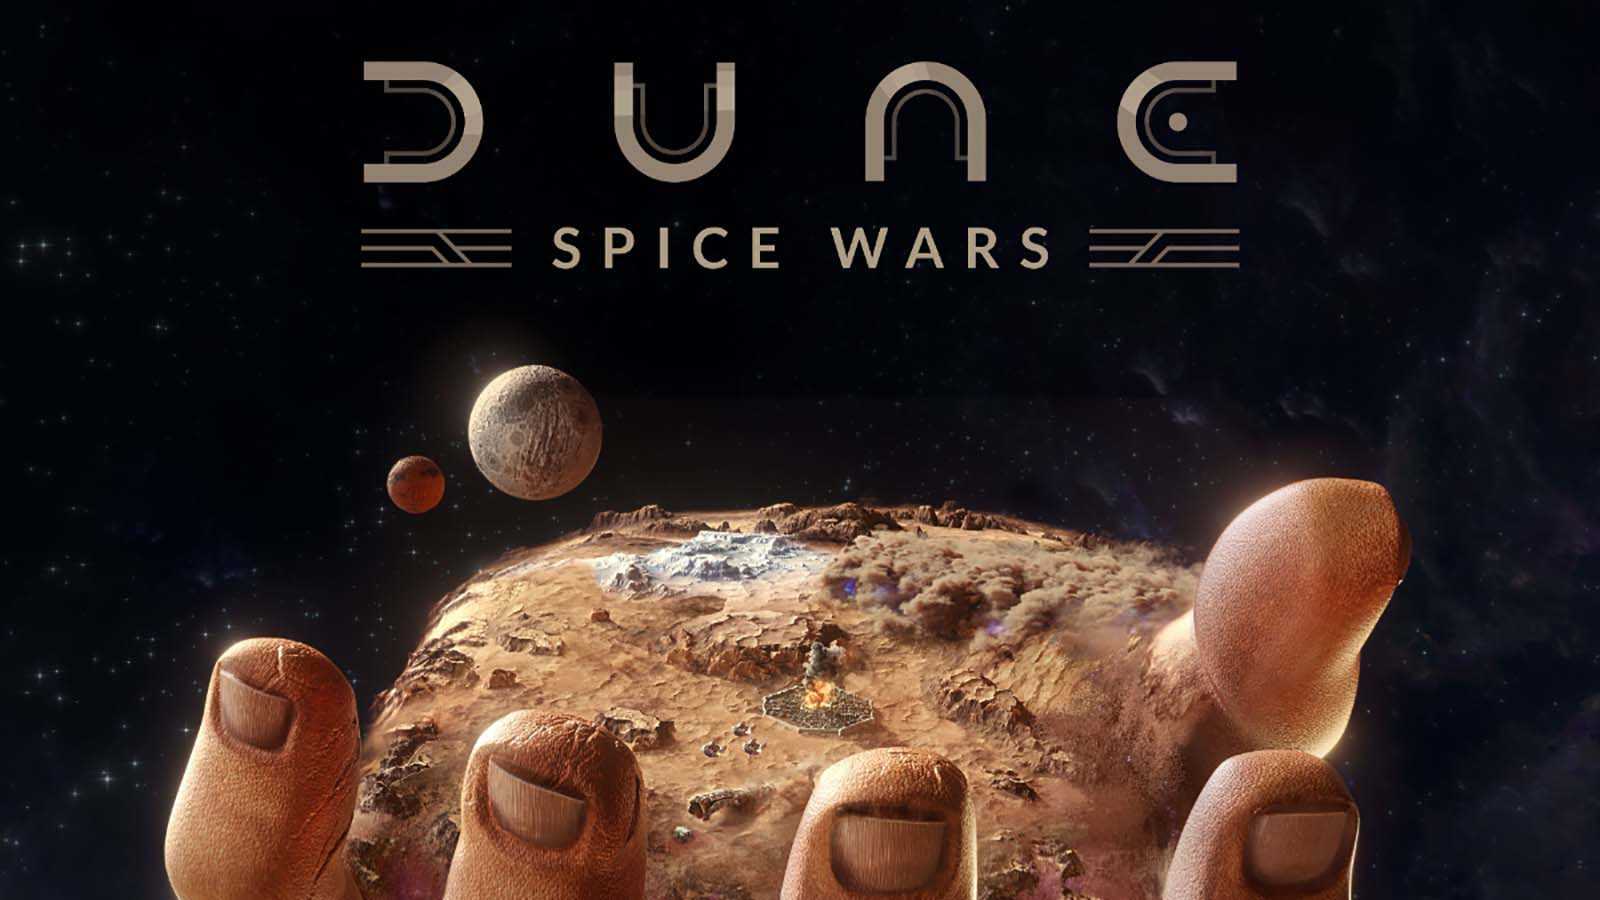 Dune spice wars factions guide and tips